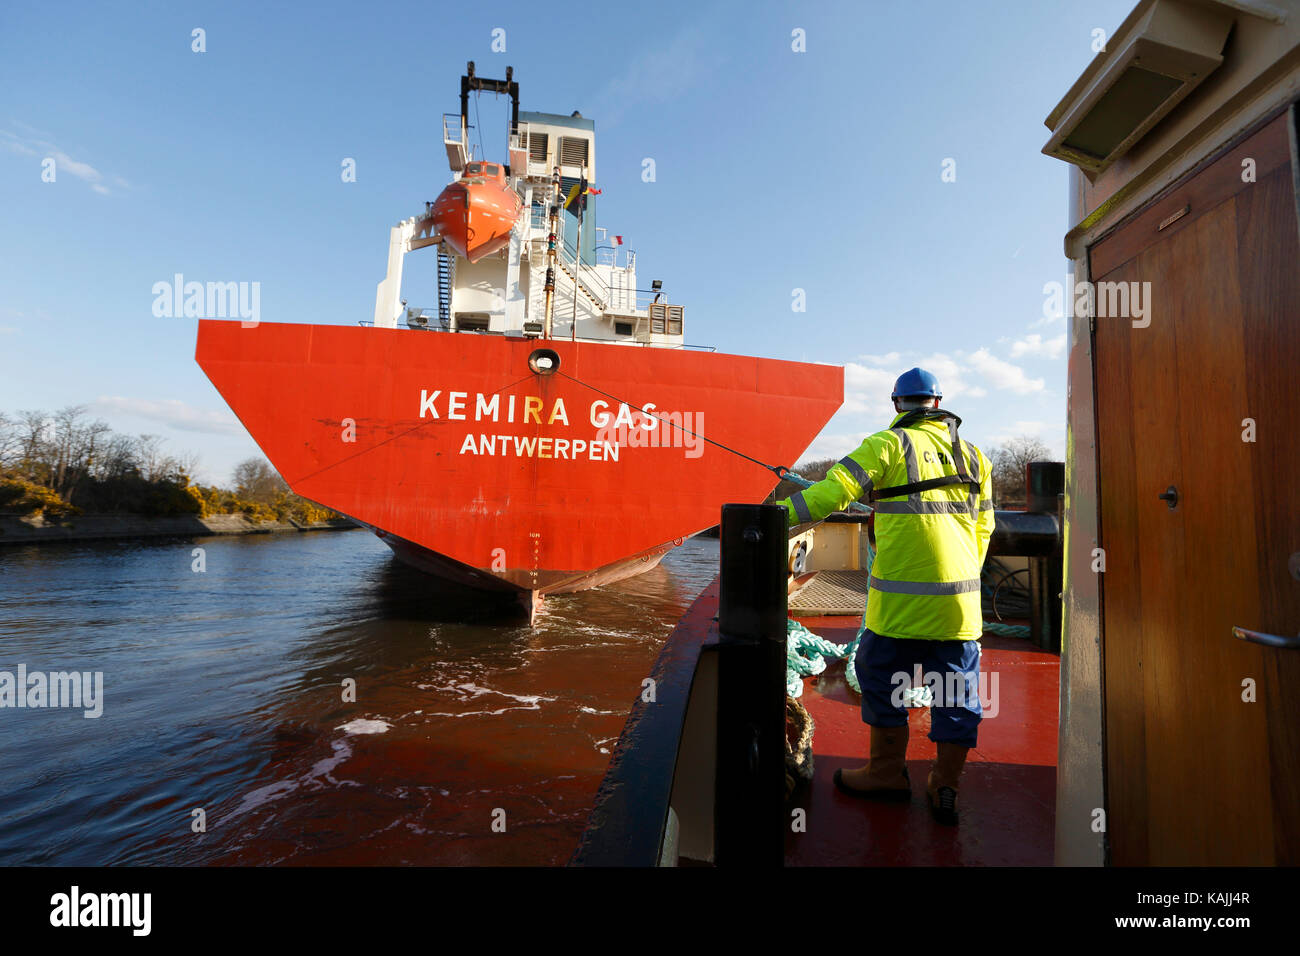 Tug boat MSC Viking pulls Kemira Gas on the Manchester Ship Canal by the River Mersey in the NE of England on April 2, 2013. Stock Photo